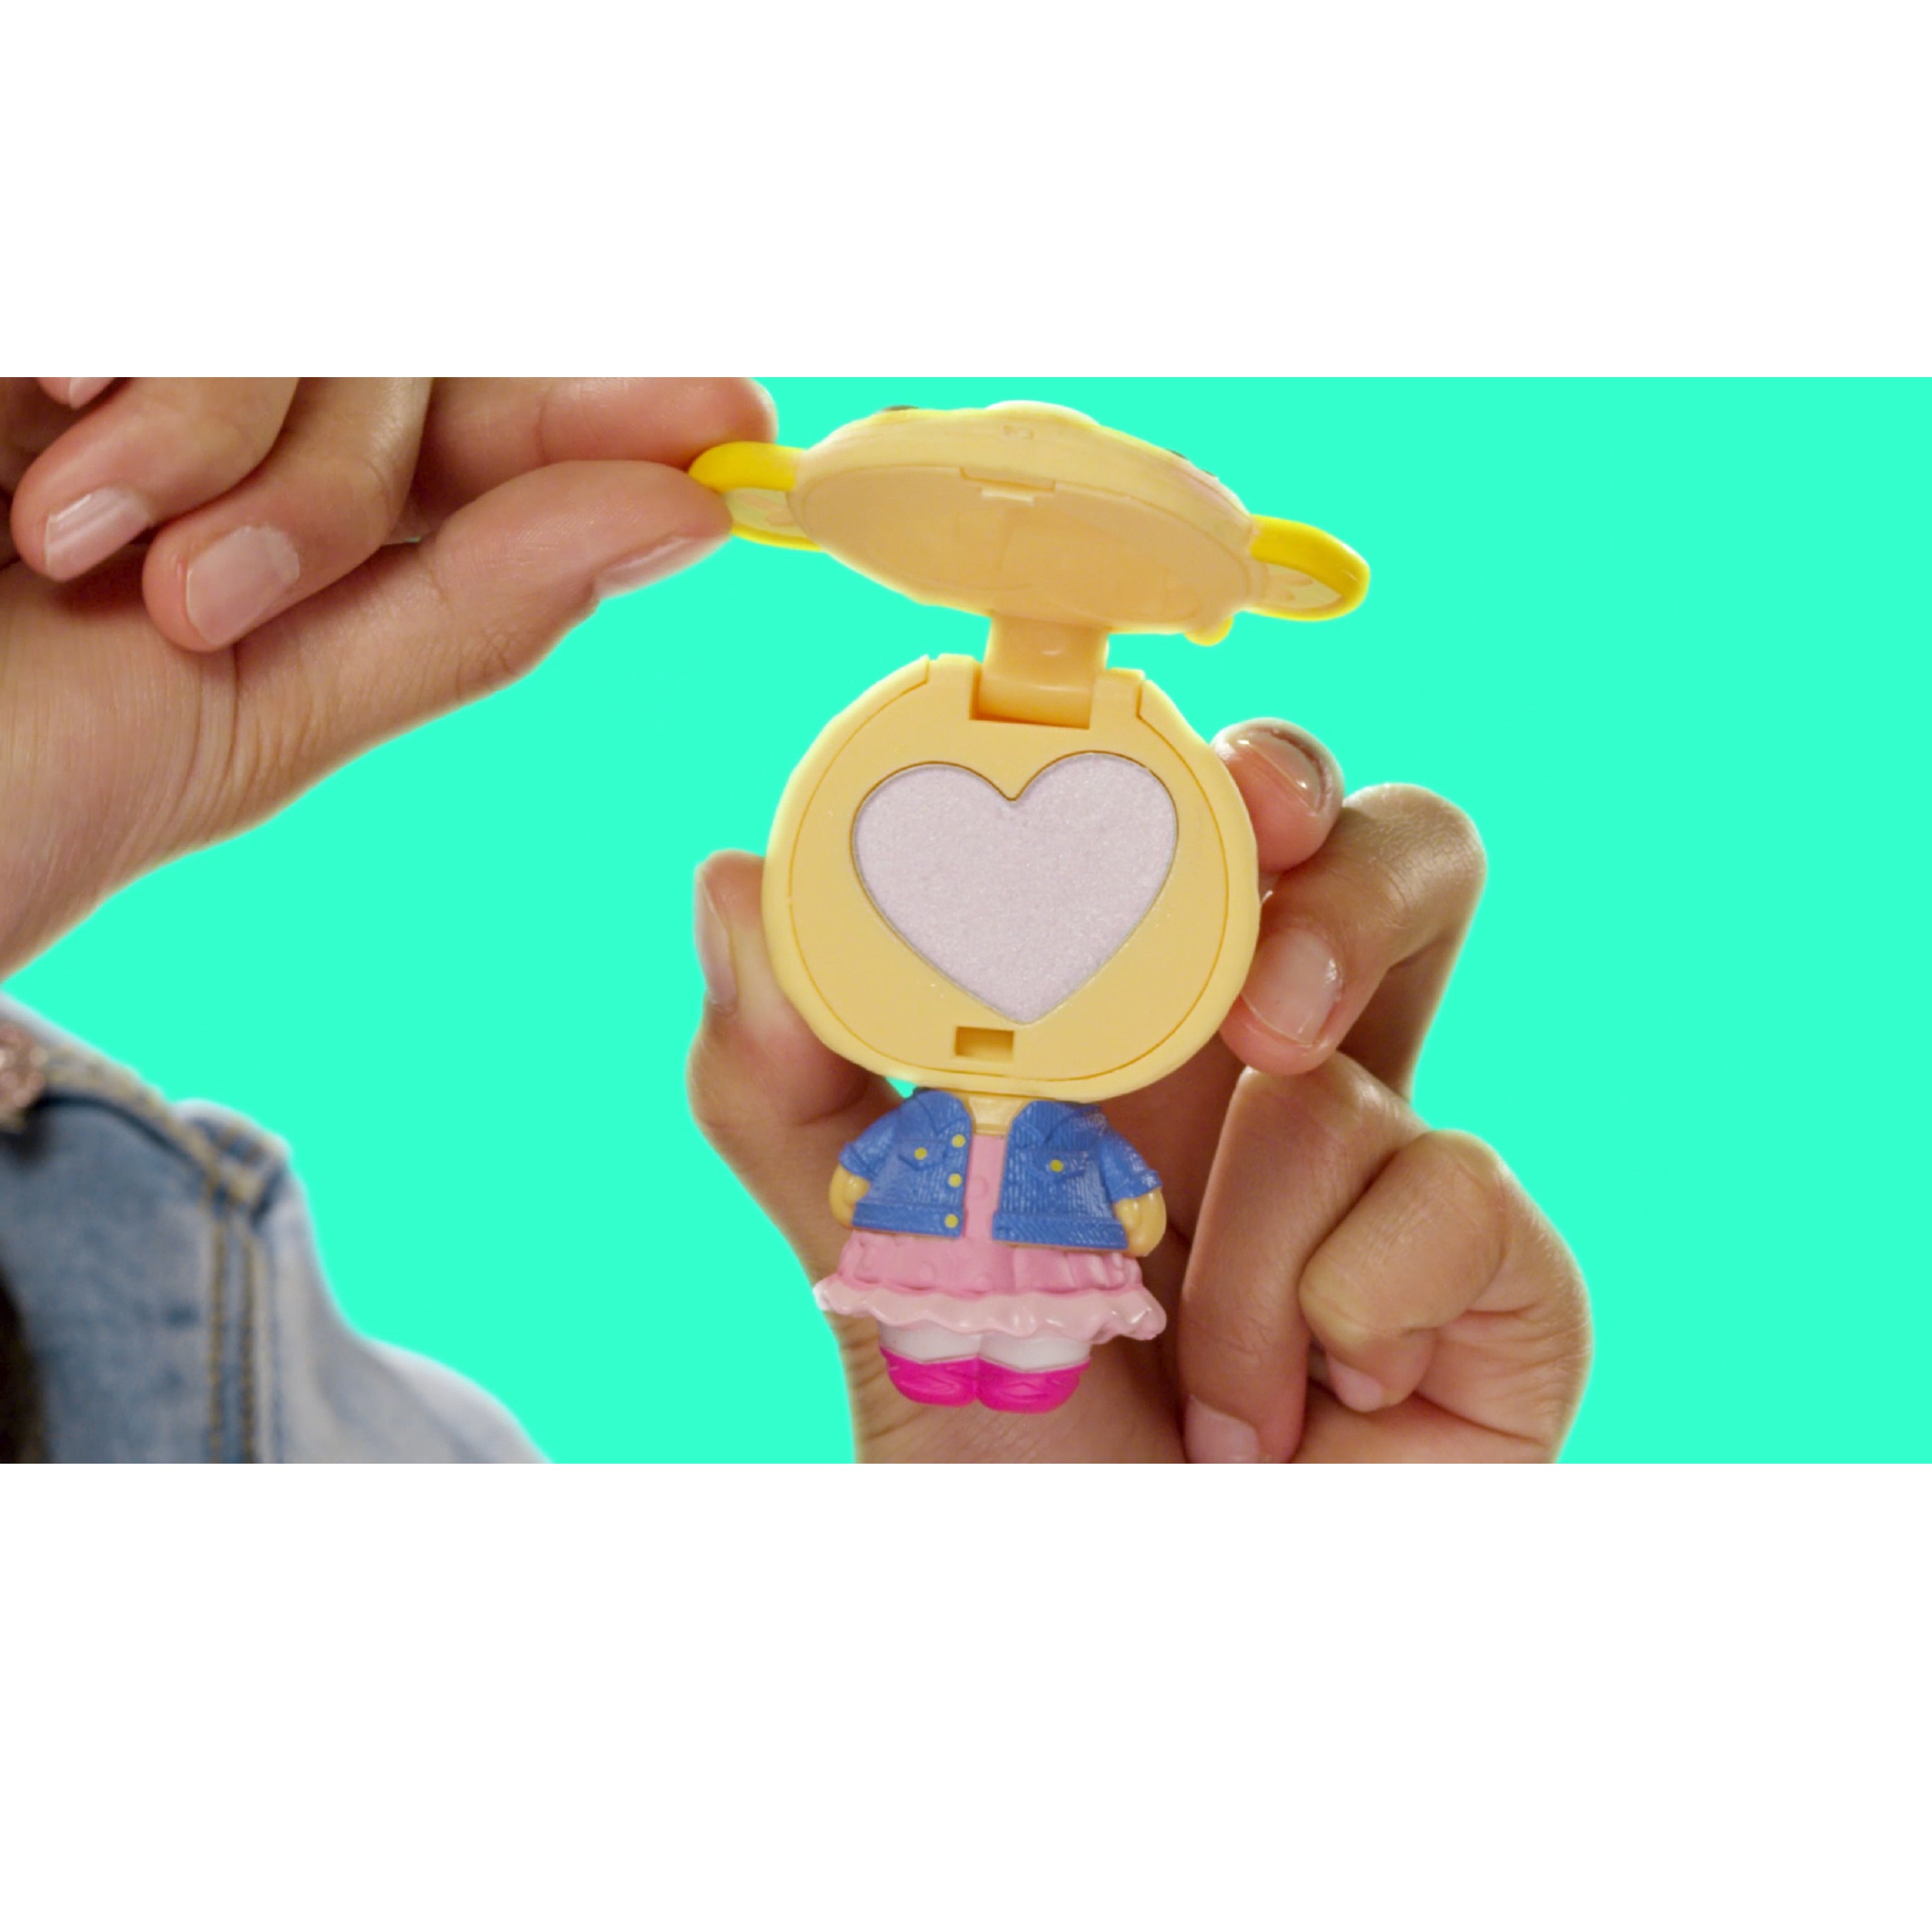 Num Noms Mystery Makeup with Hidden Cosmetics Inside - image 4 of 7